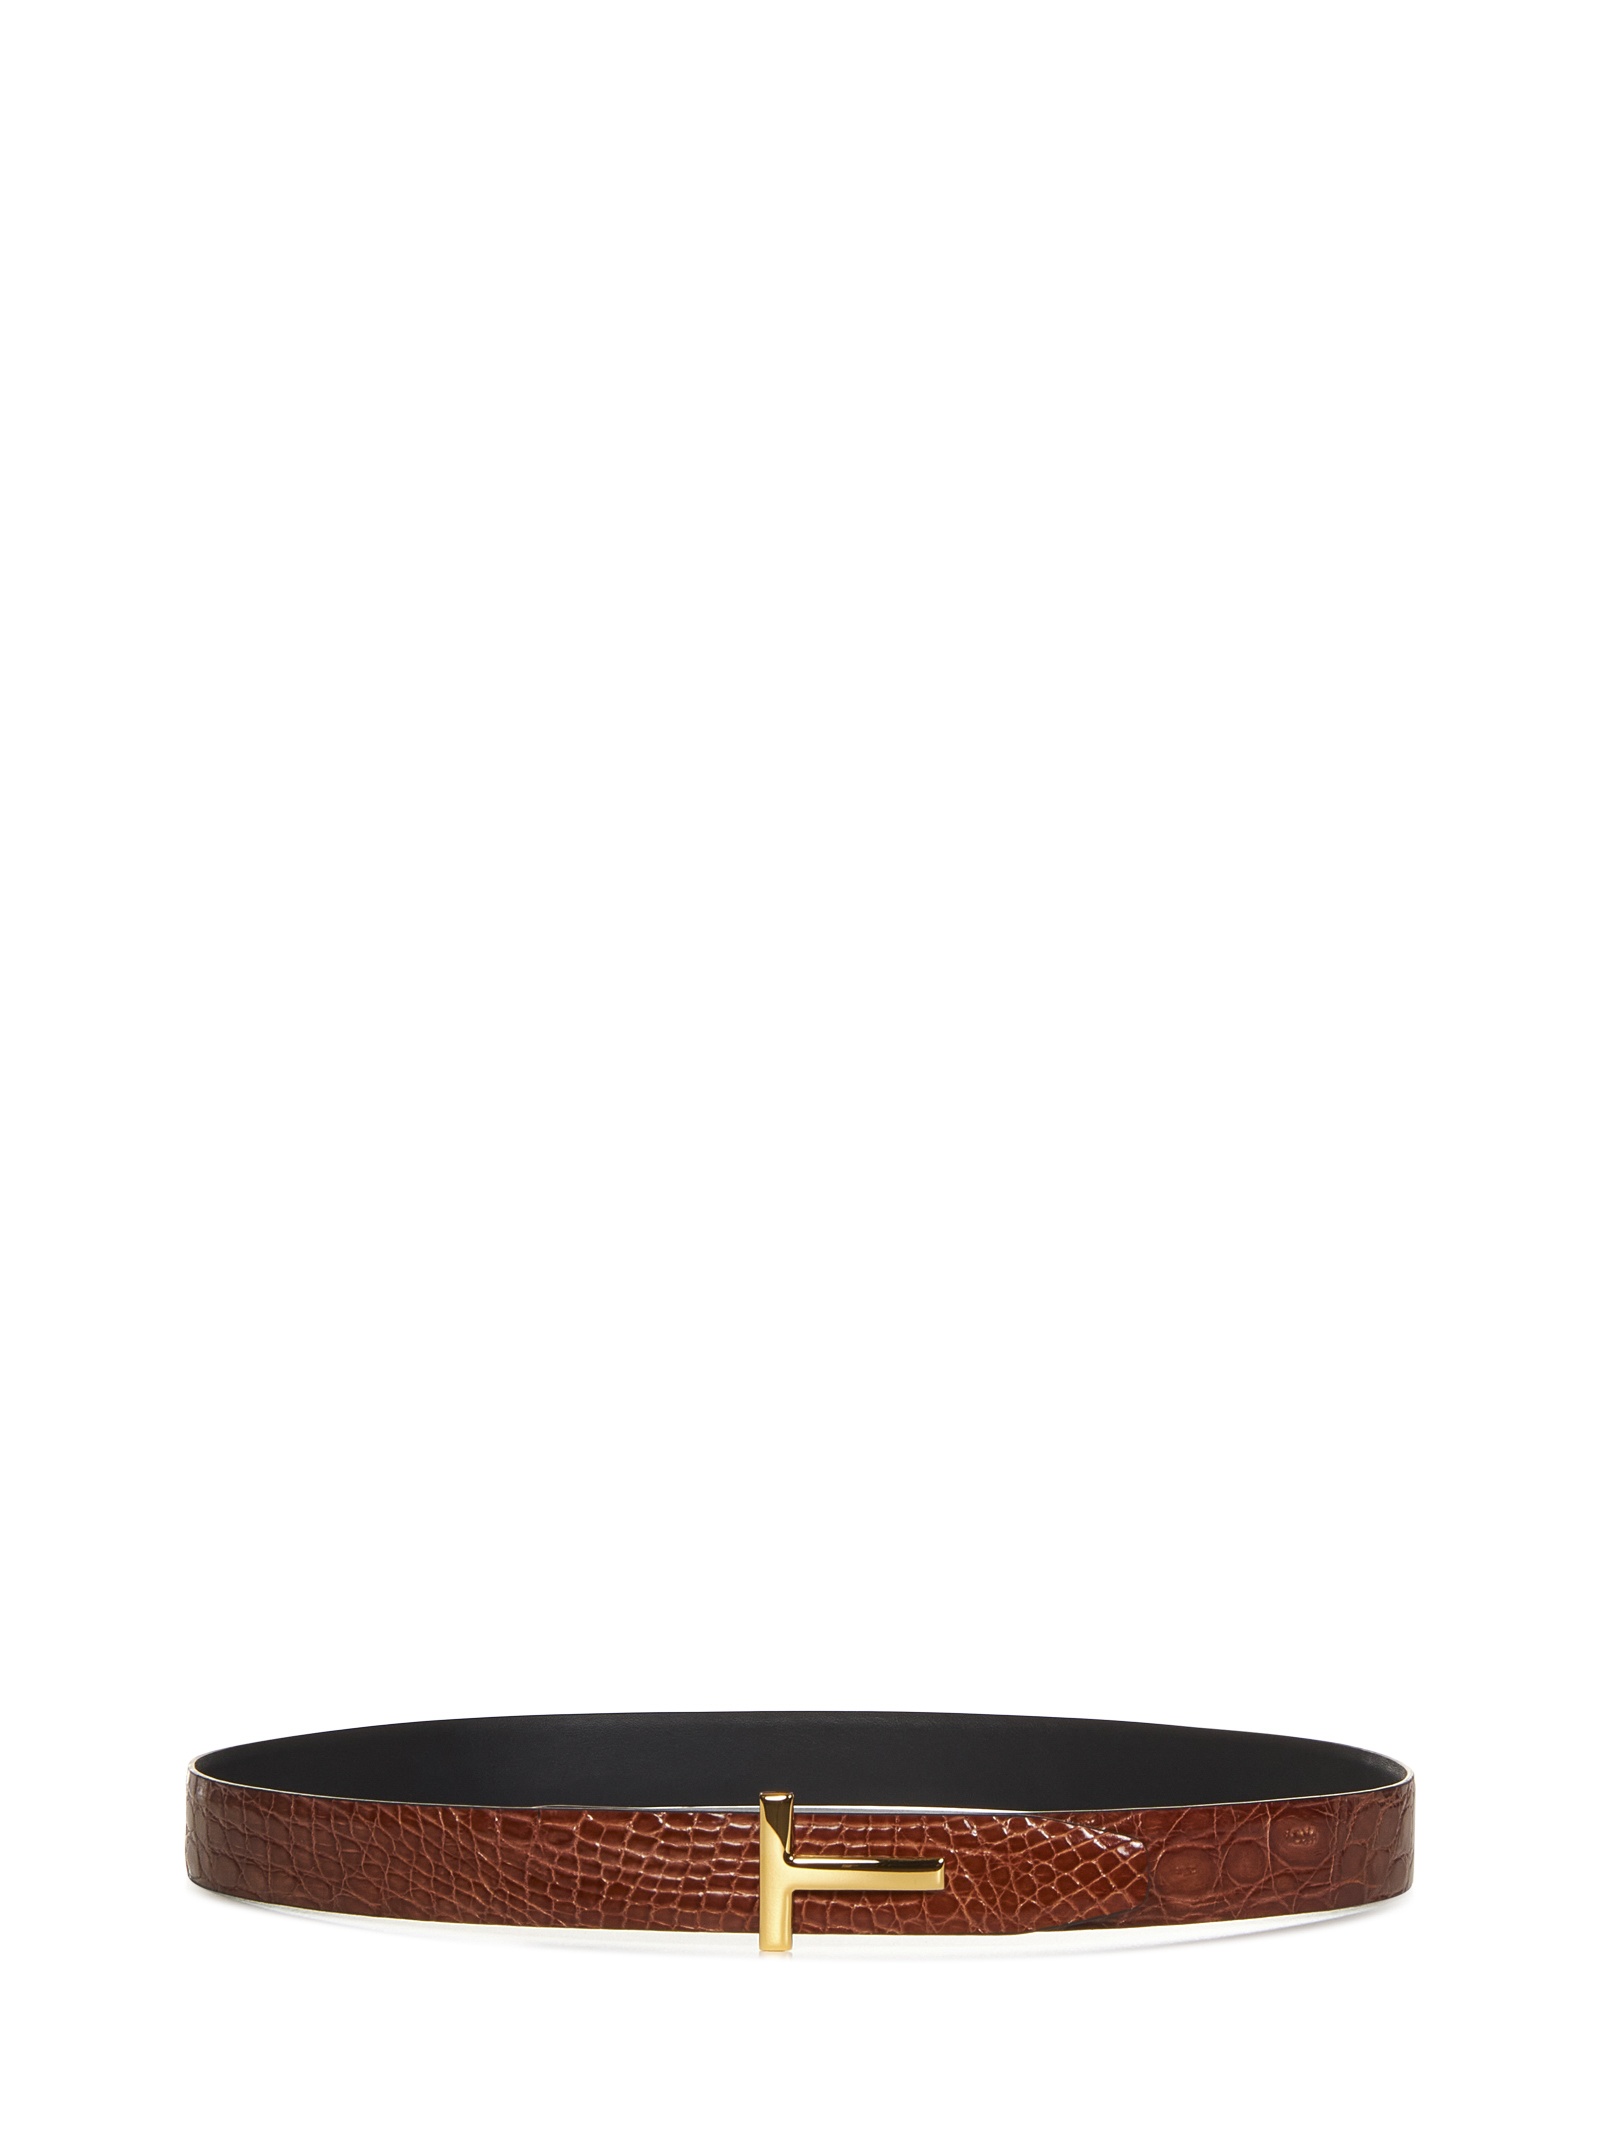 Reversible belt in tan caiman leather and black smooth leather with T-buckle. - 1